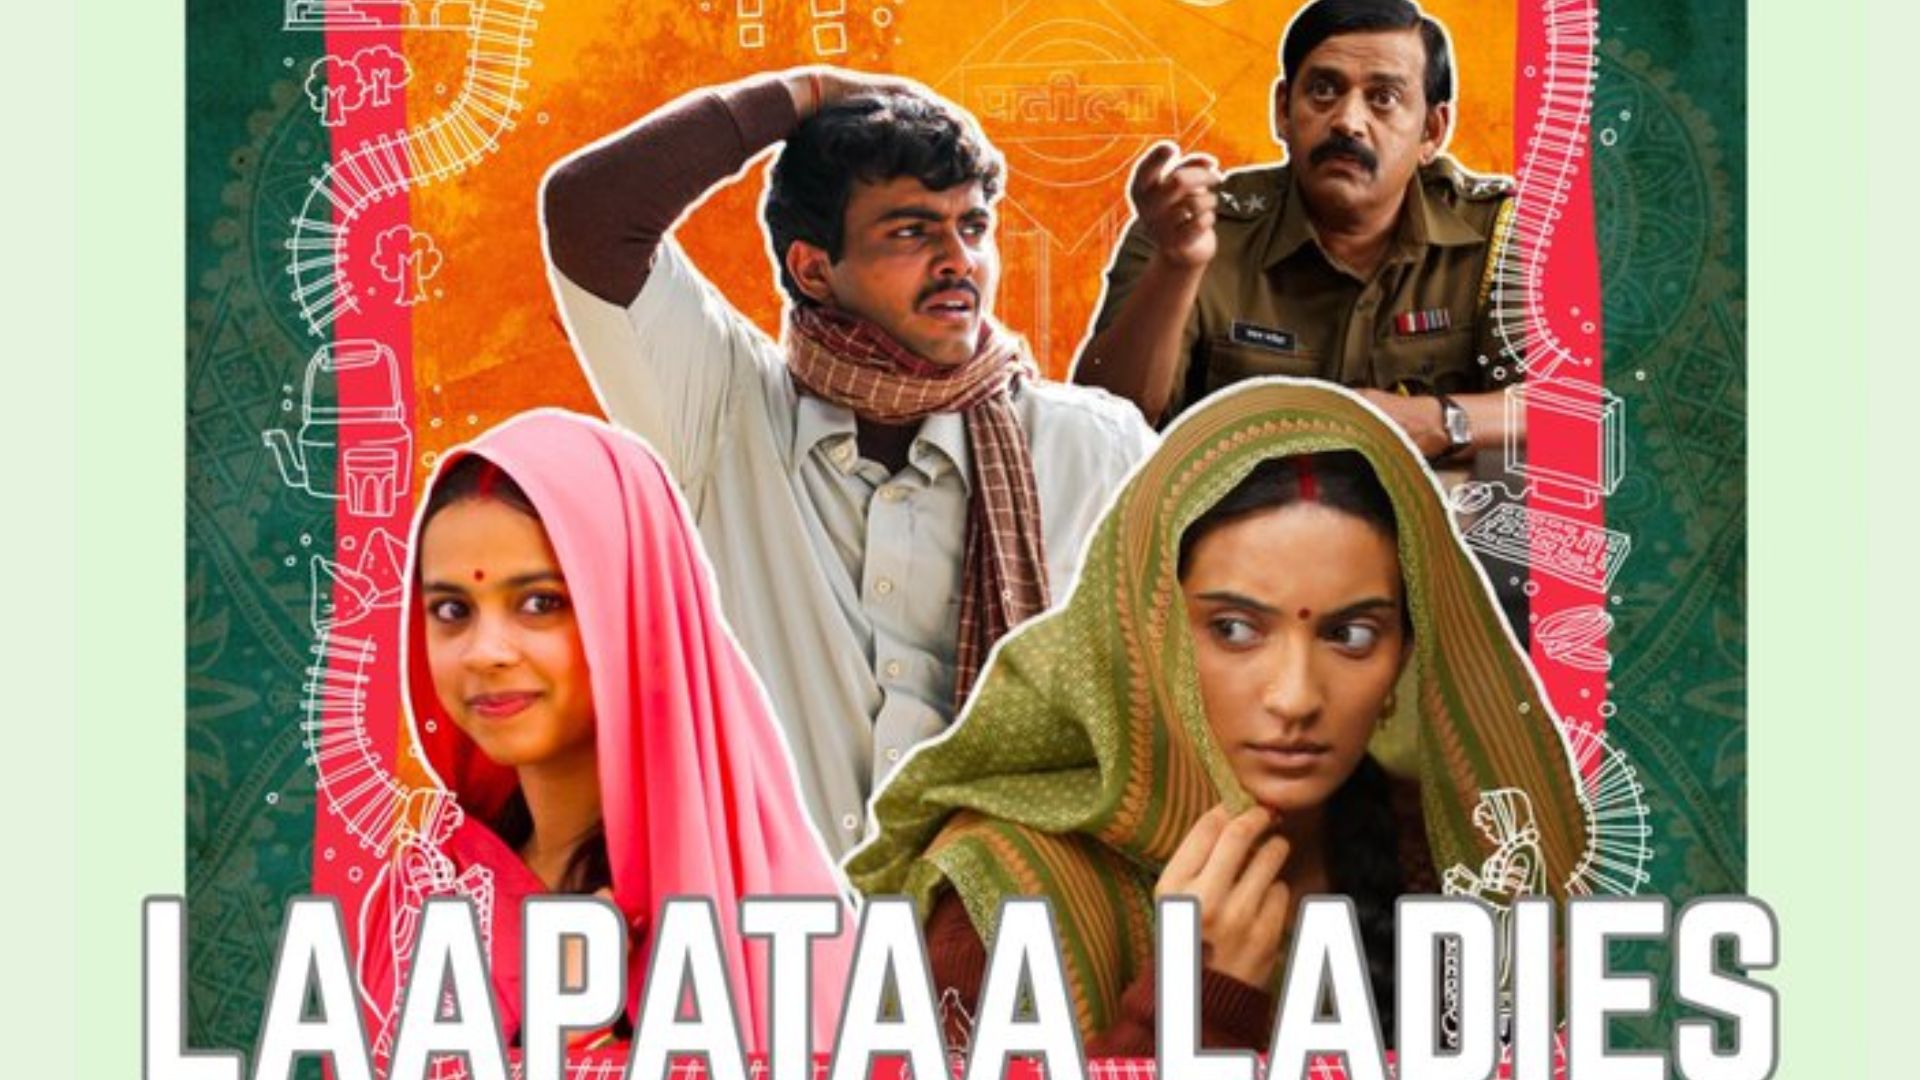 Laapataa Ladies directed by Kiran rao hits theatres today